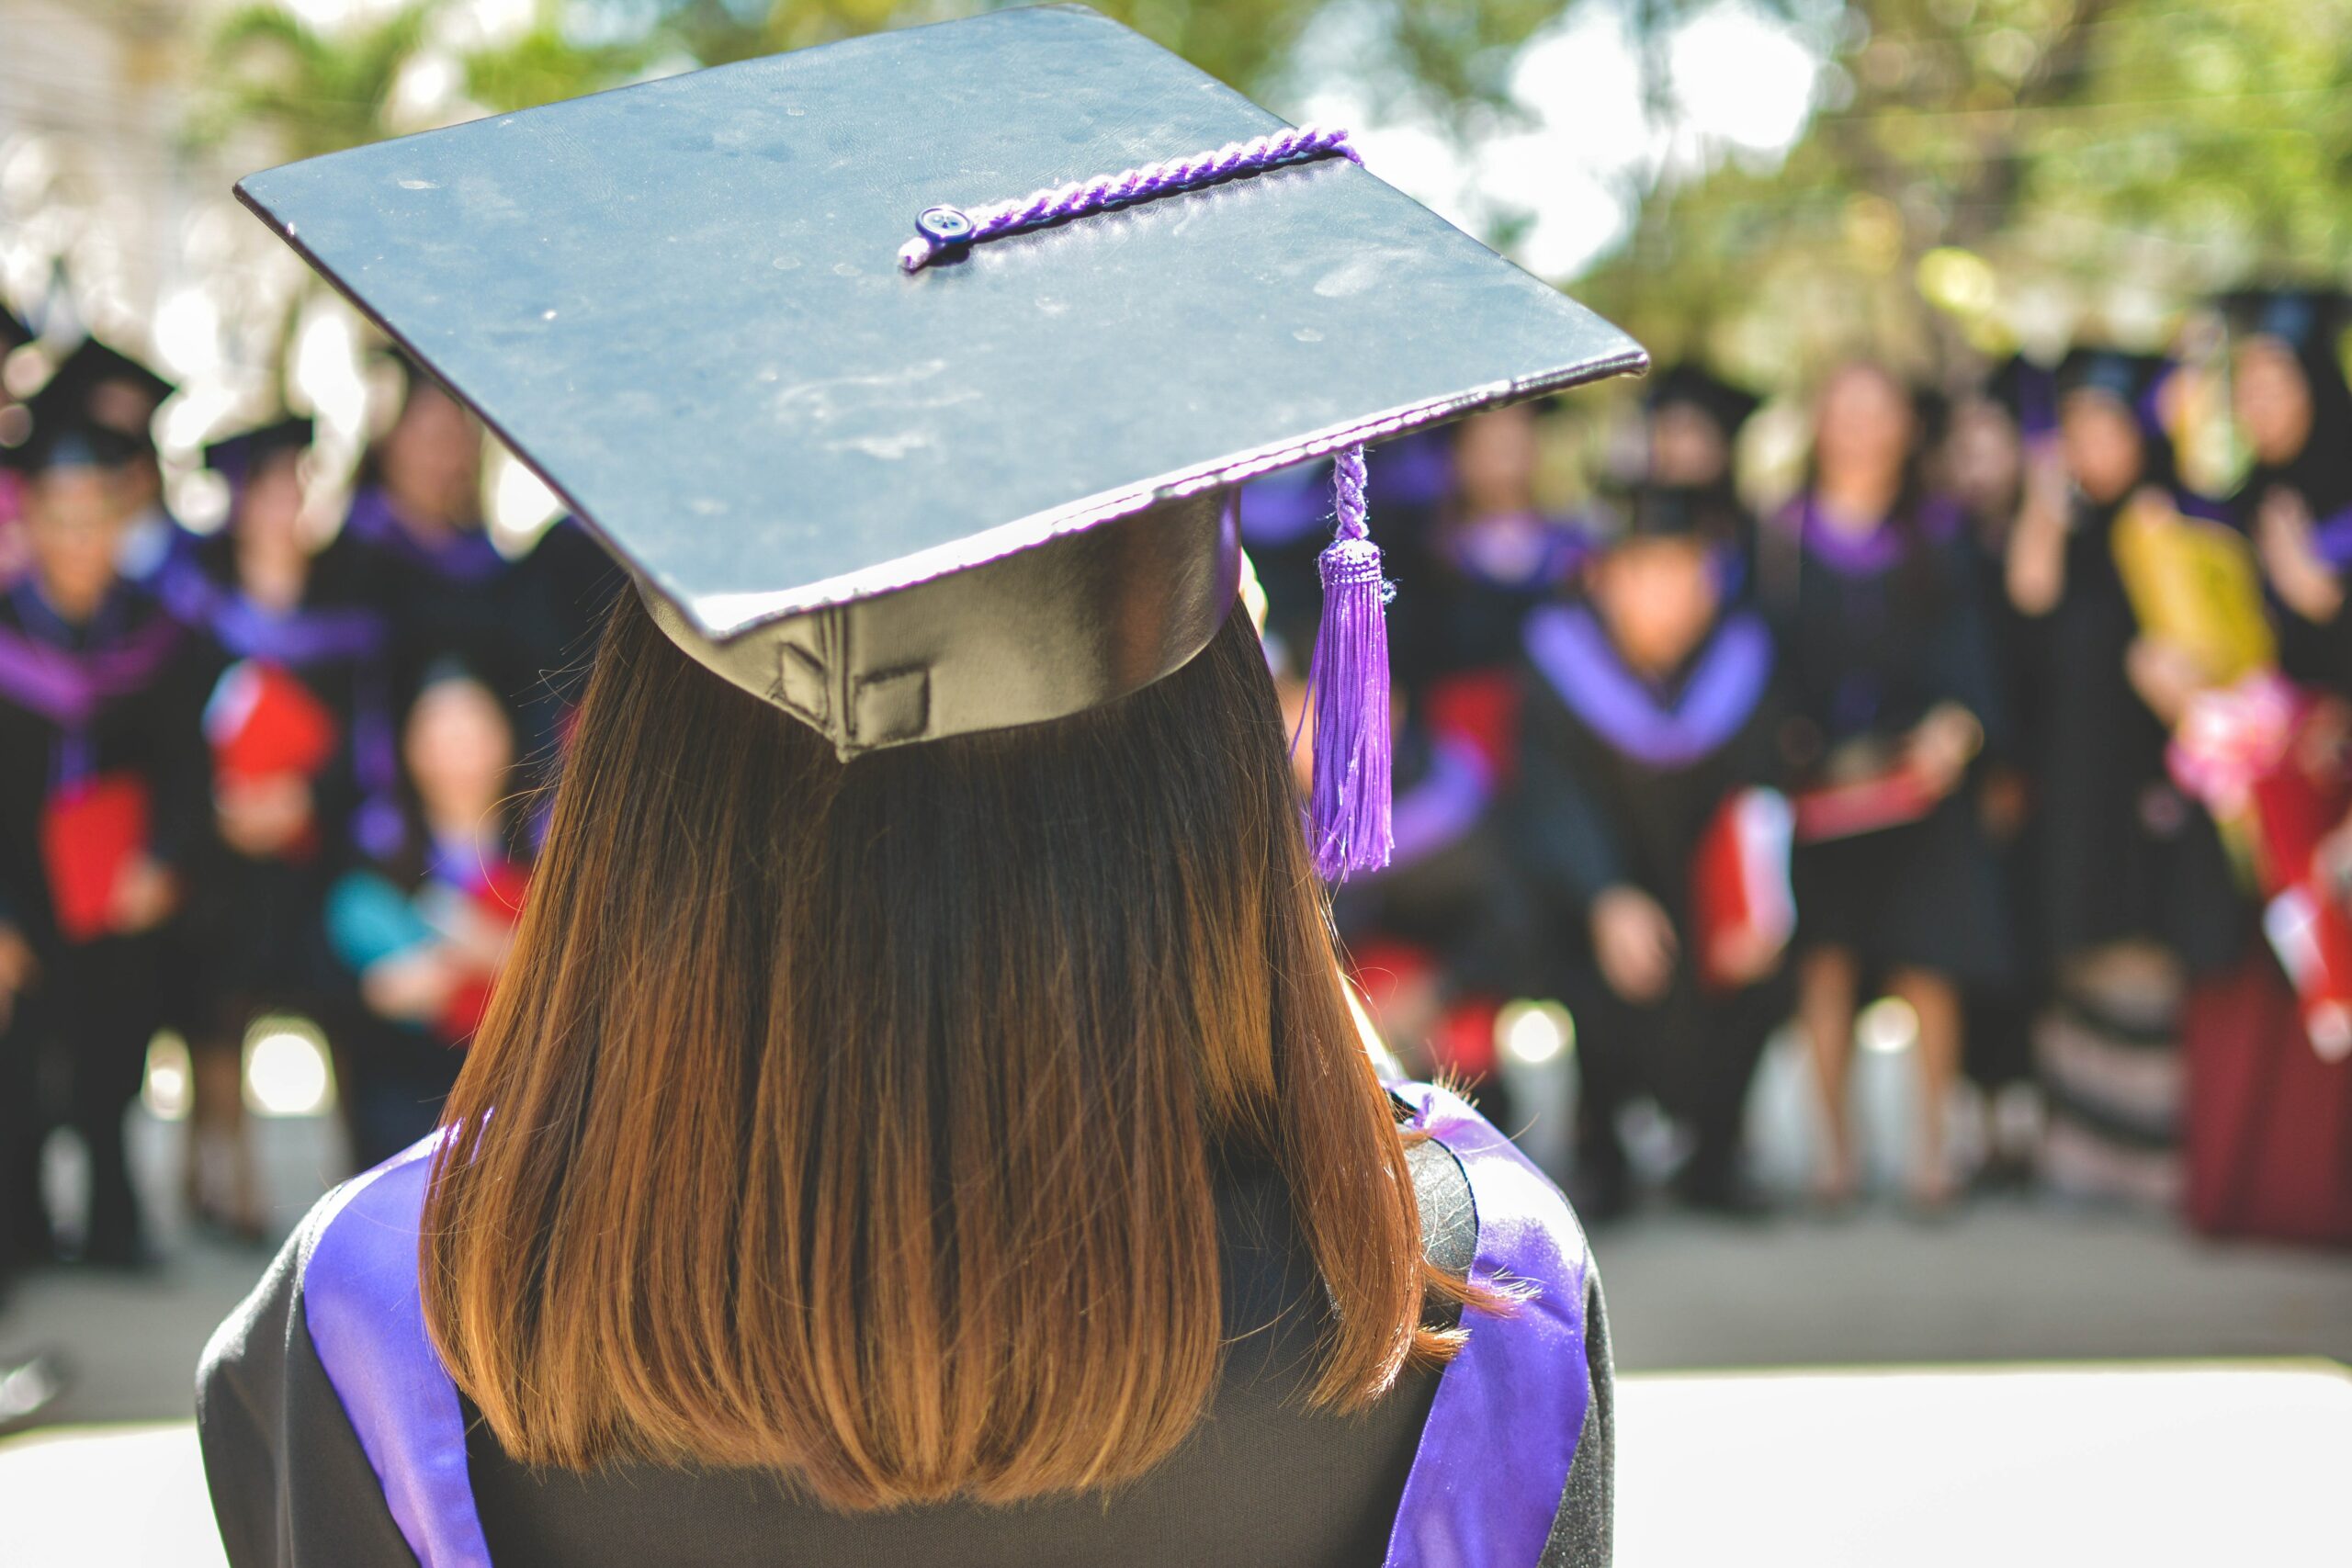 Selling Yourself—Show Up Strong Even if You’re a New Grad